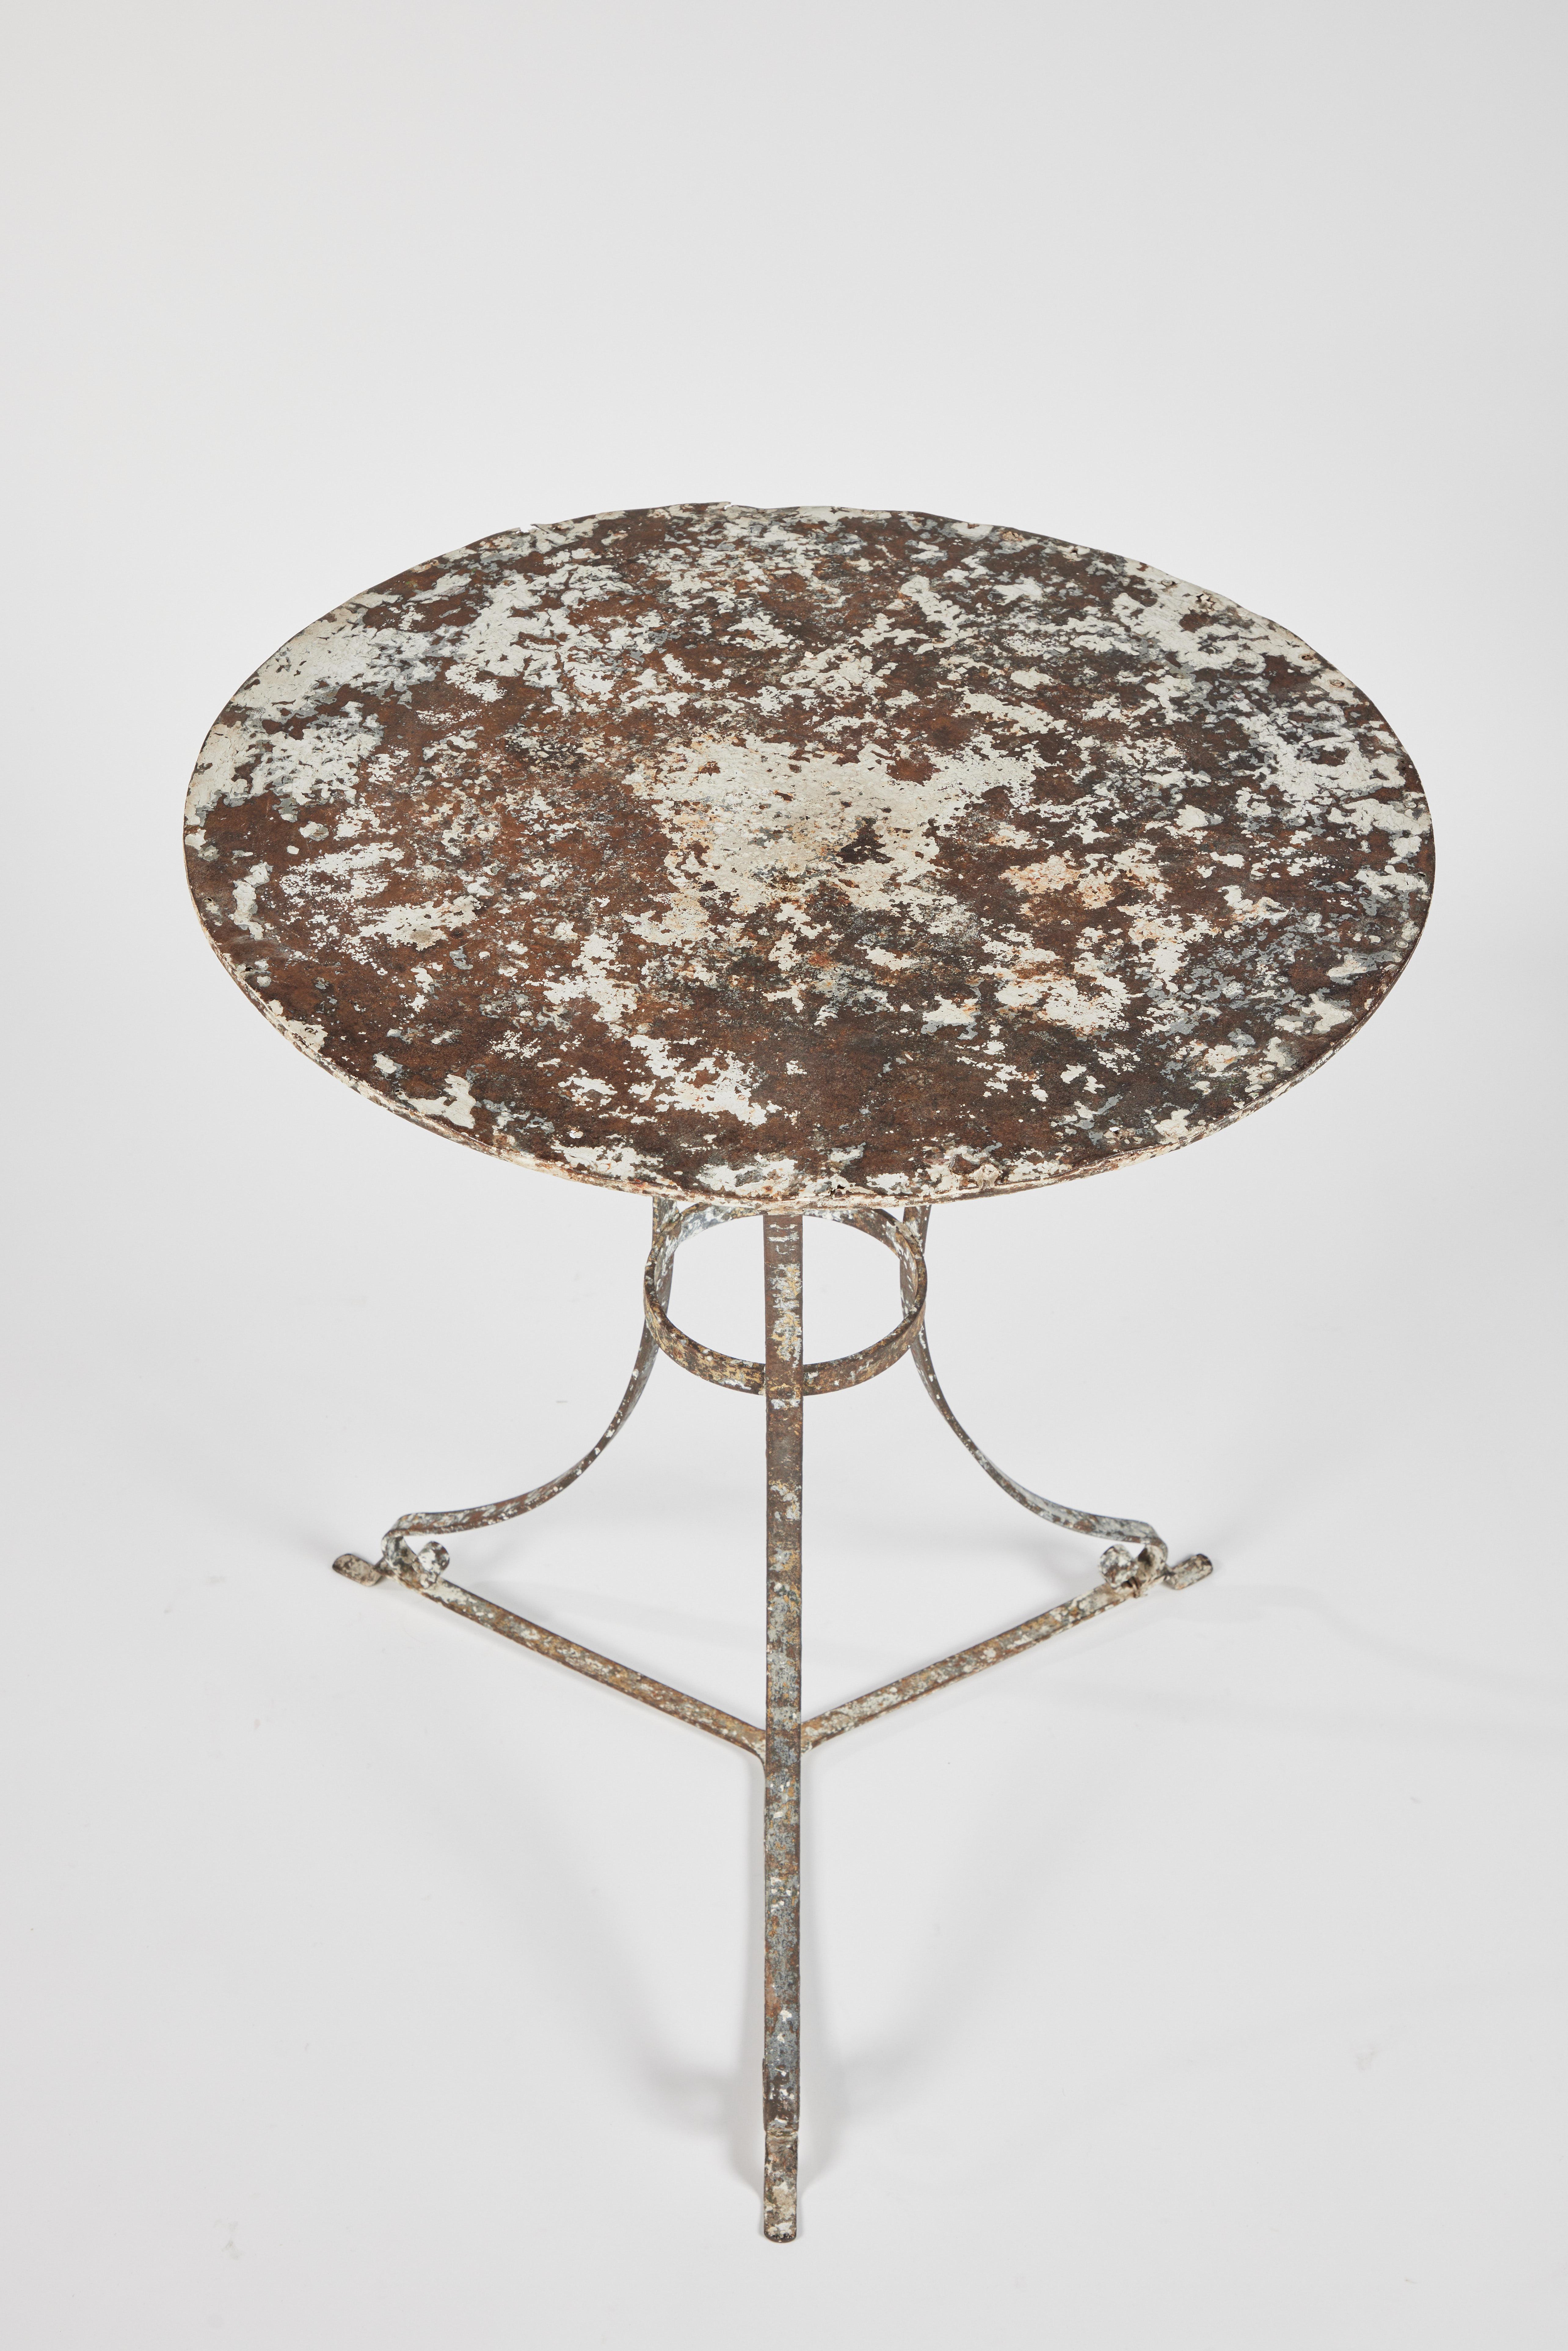 19th century French iron garden table, oxidation/natural rust from outdoor use.